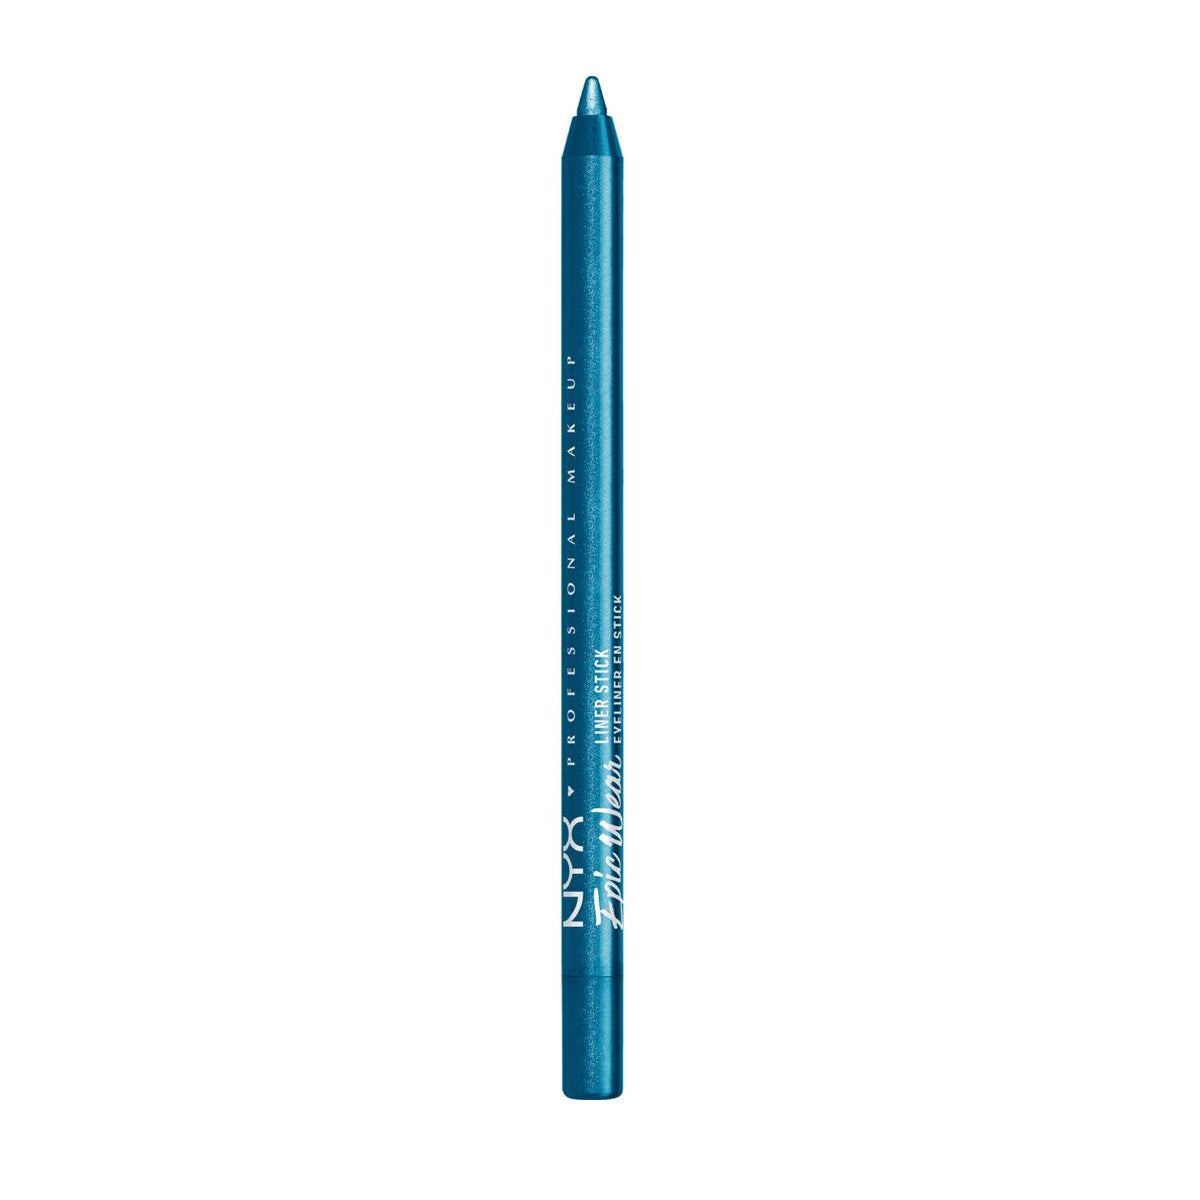 Eye Pencil NYX Epic Wear turquois storm (1,22 g)